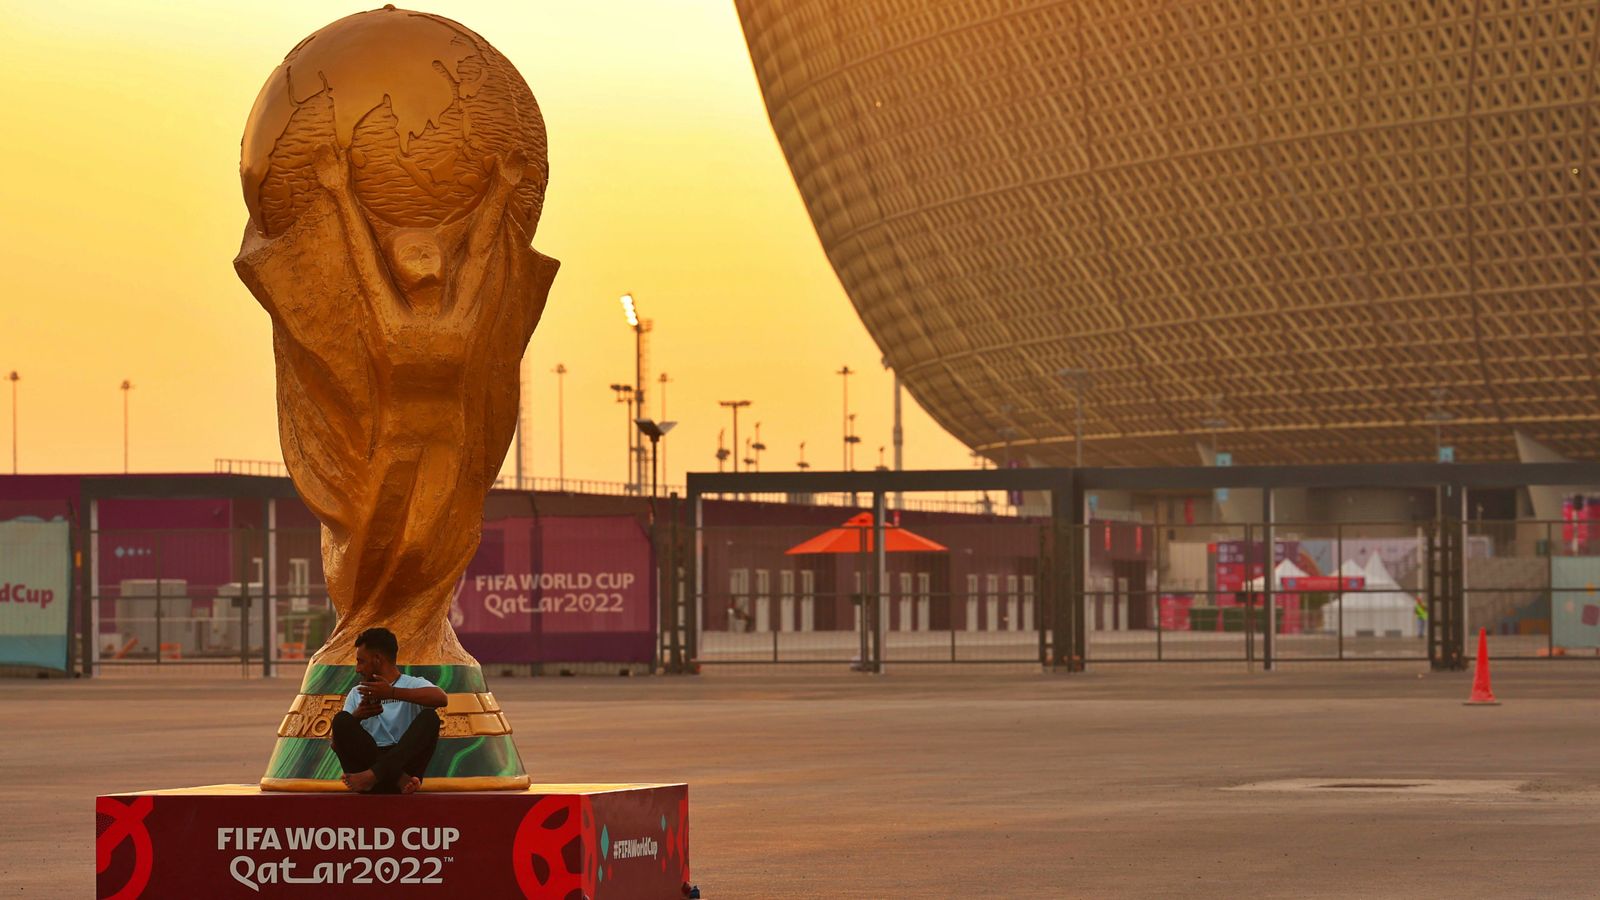 Qatar World Cup: Beer to be banned from all stadiums - except for corporate spectators